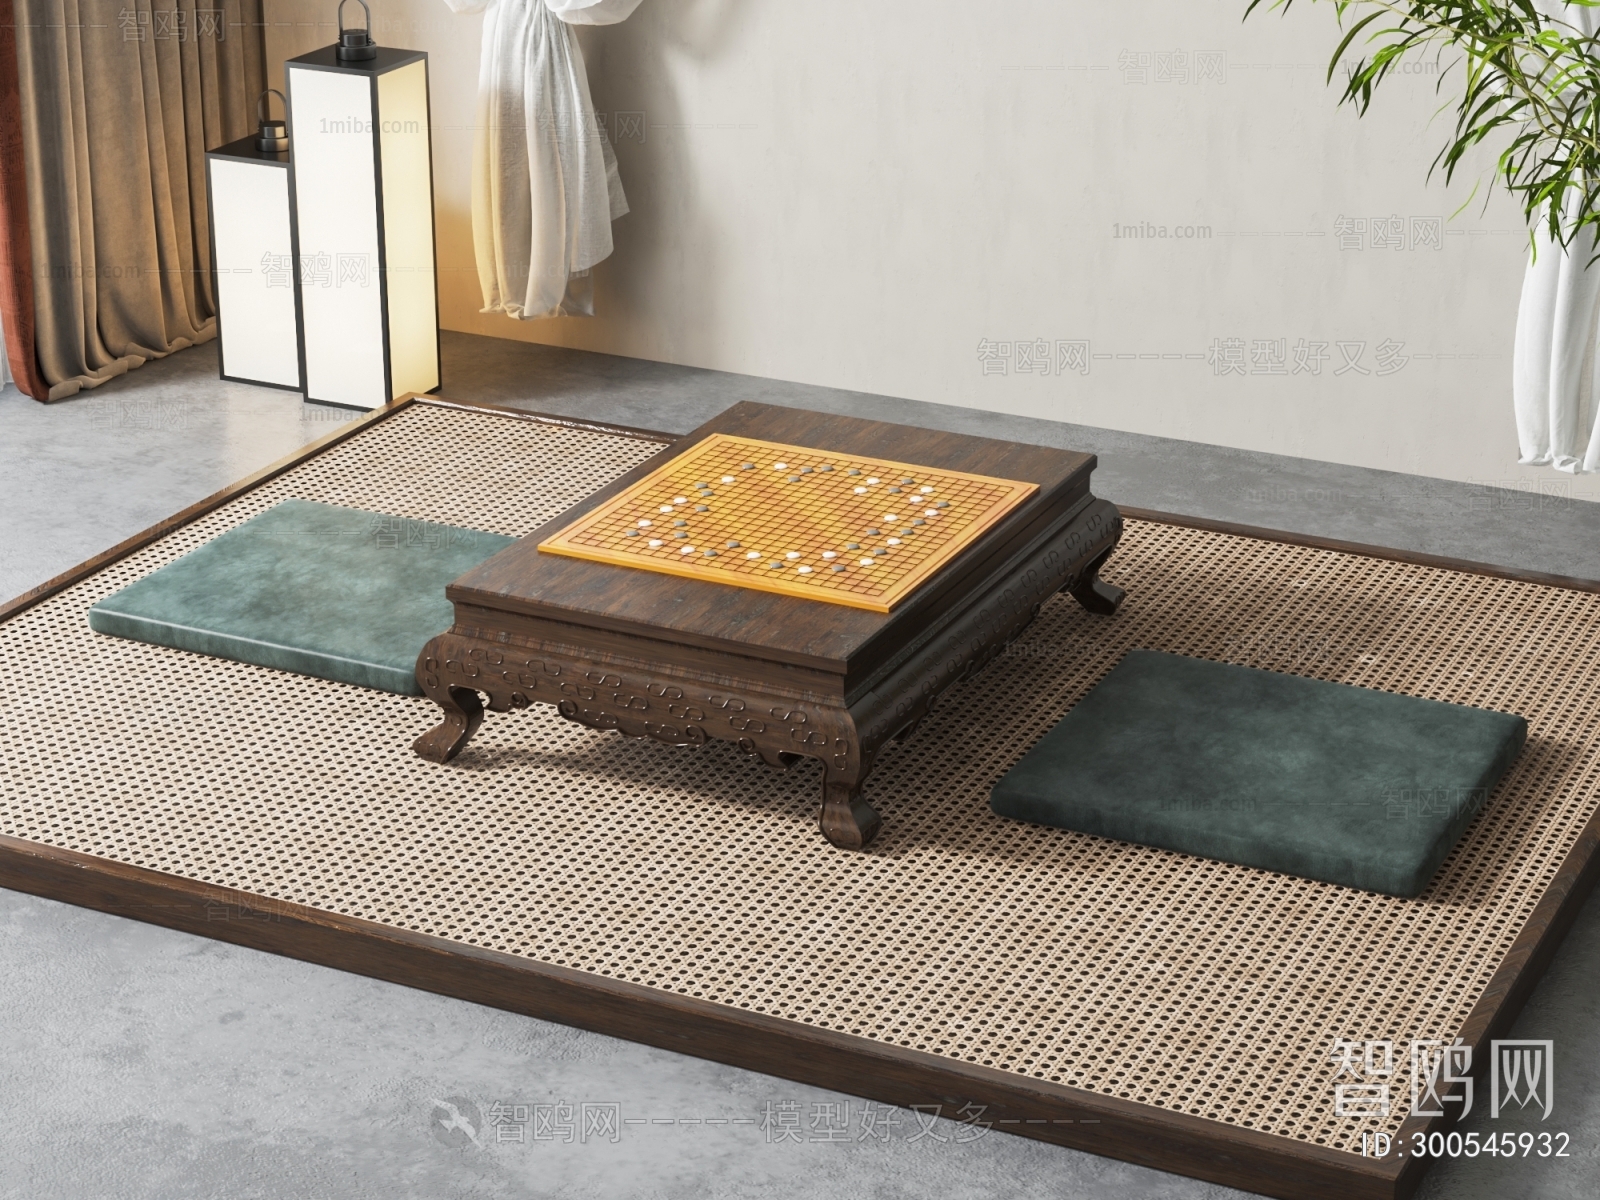 Chinese Style Entertainment Table And Chair